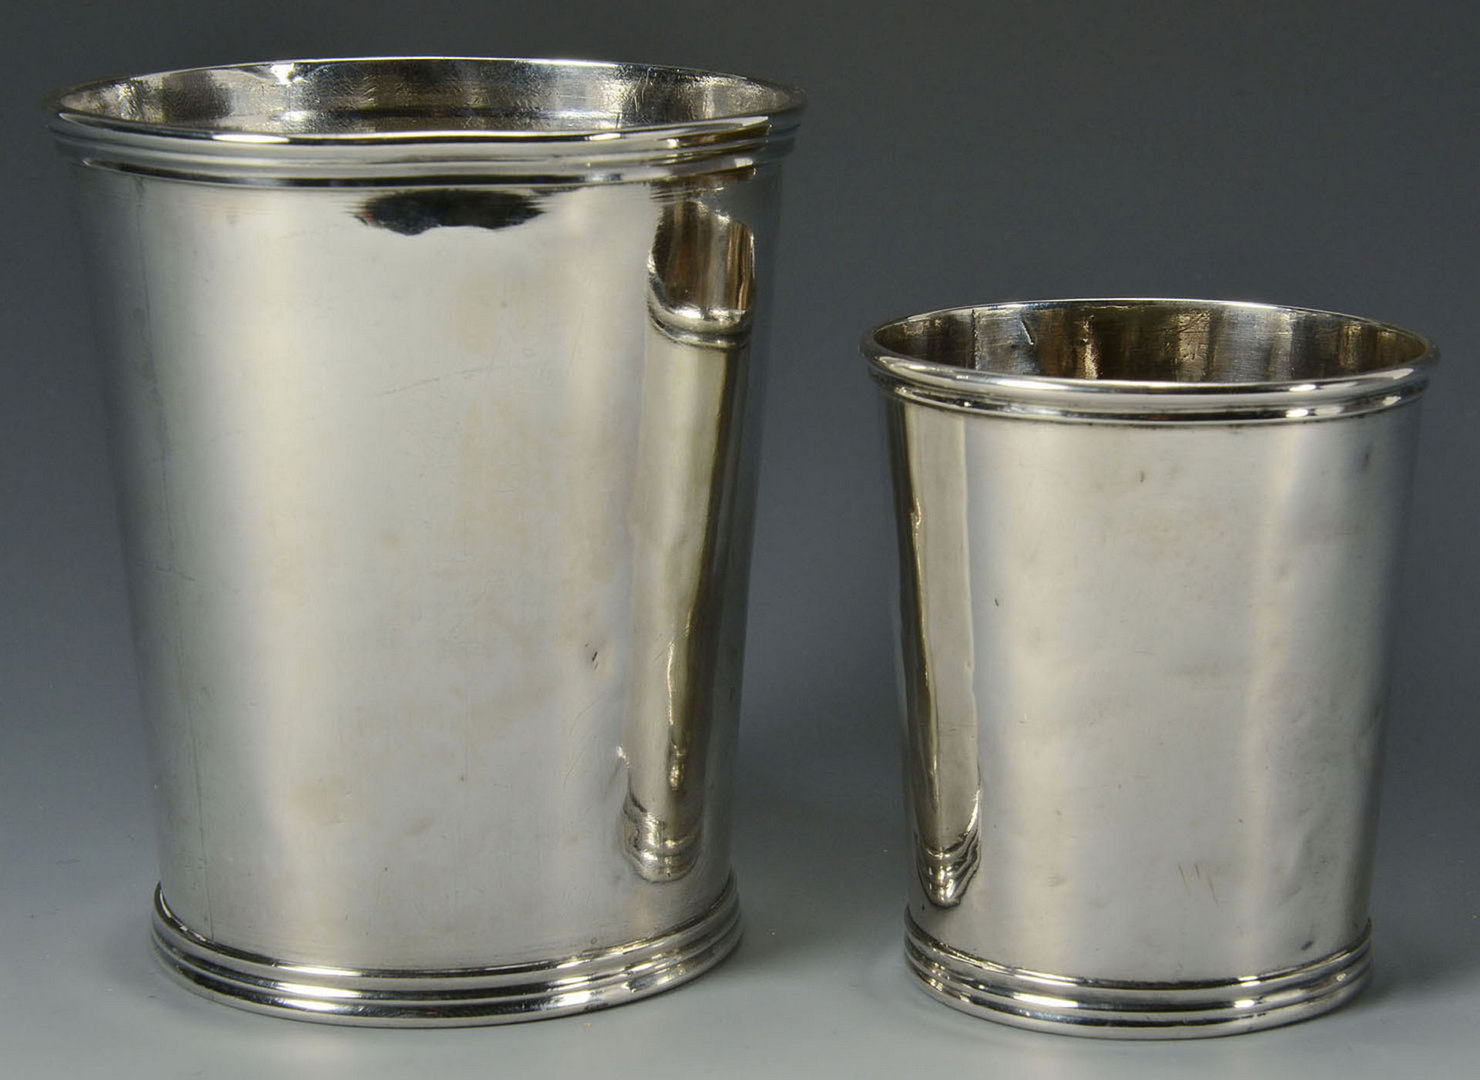 Lot 77: 2 Coin Silver Beakers or Julep Cups